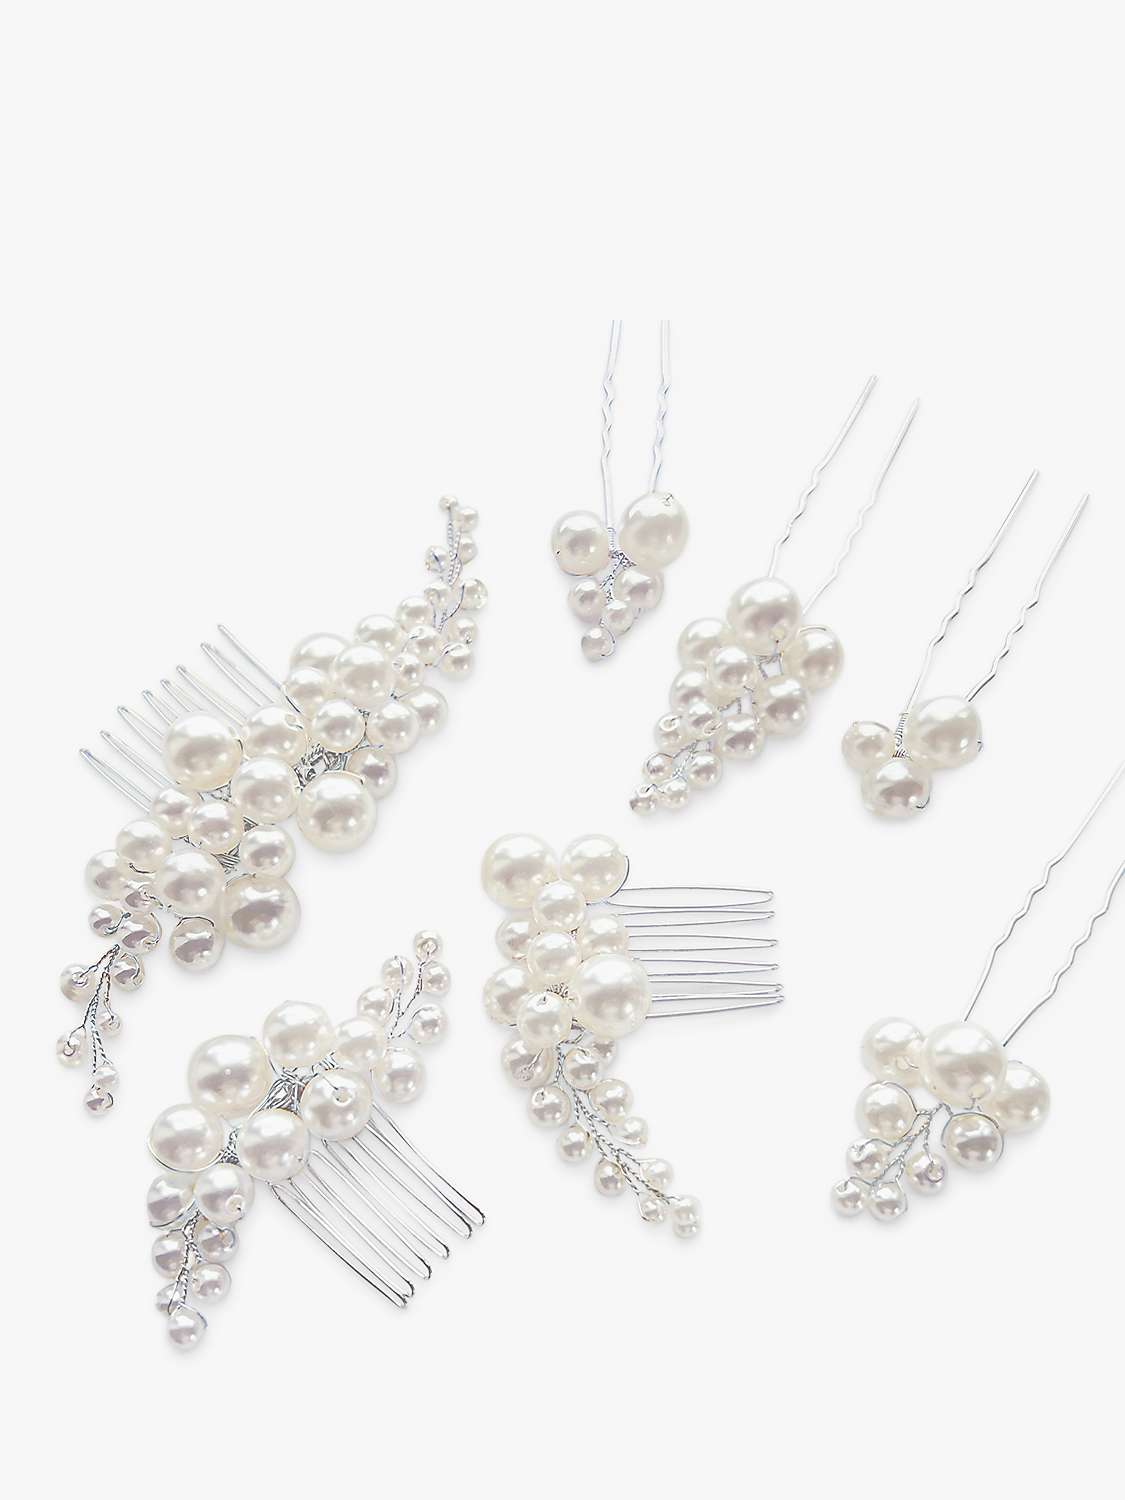 Buy Ivory & Co. Faux Pearl Hair Pin, Set of 7, Silver/White Online at johnlewis.com